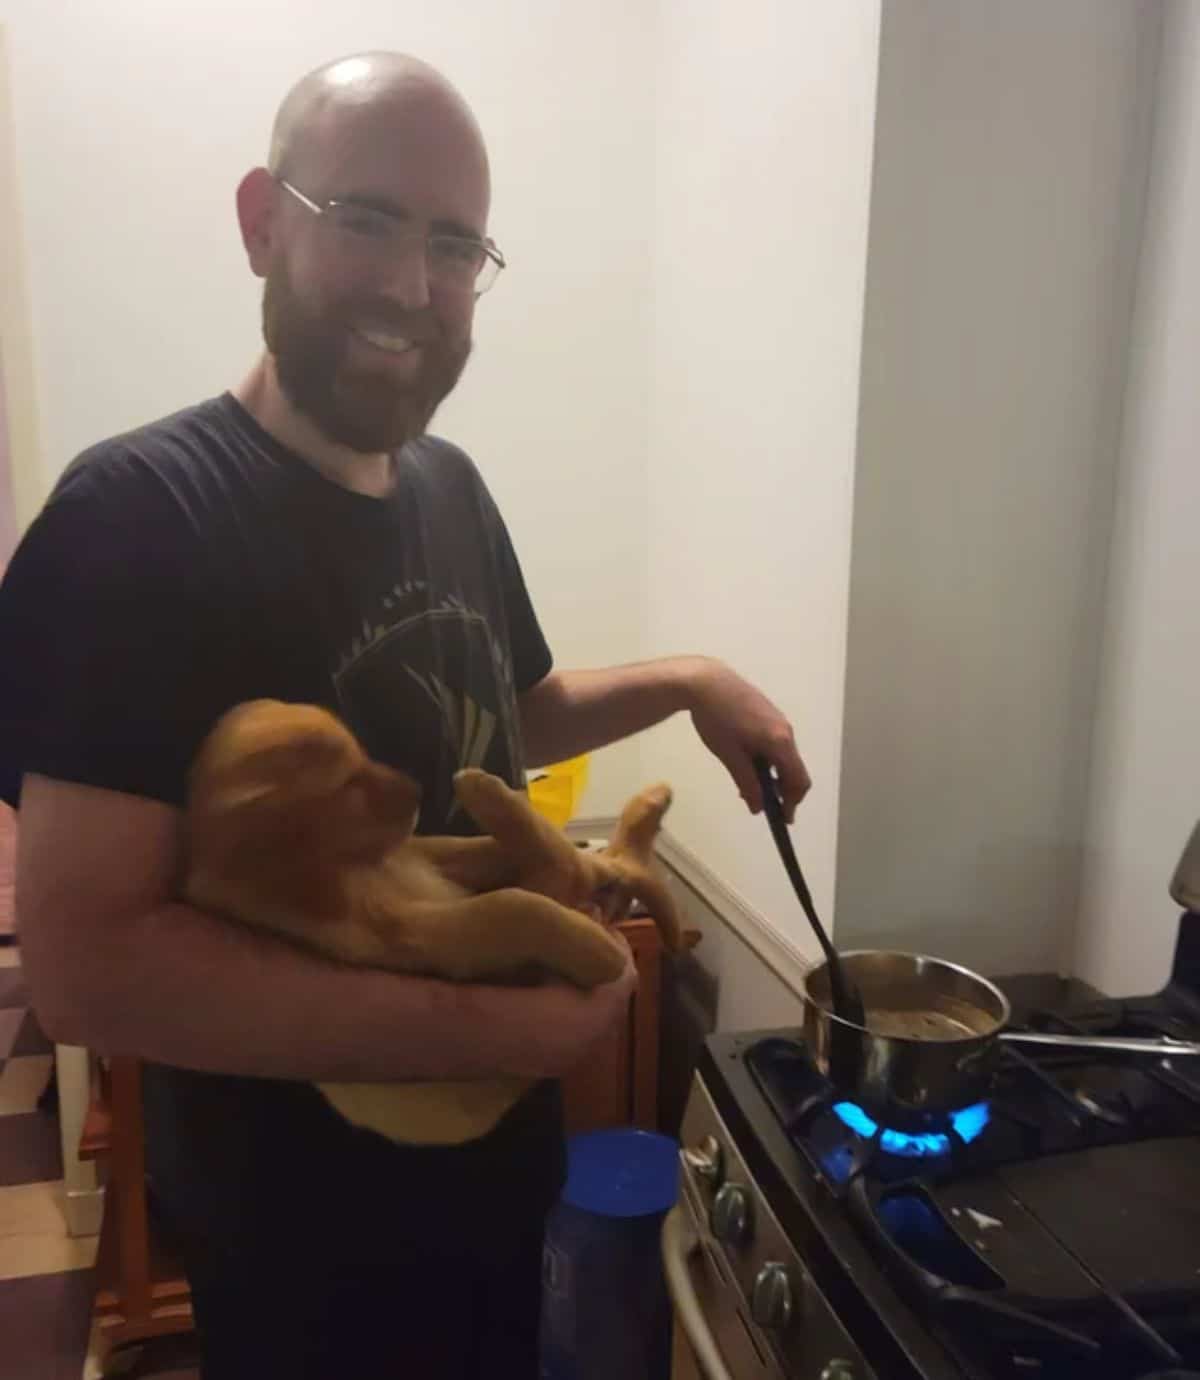 man cooking something on a stove while holding a golden retriever puppy